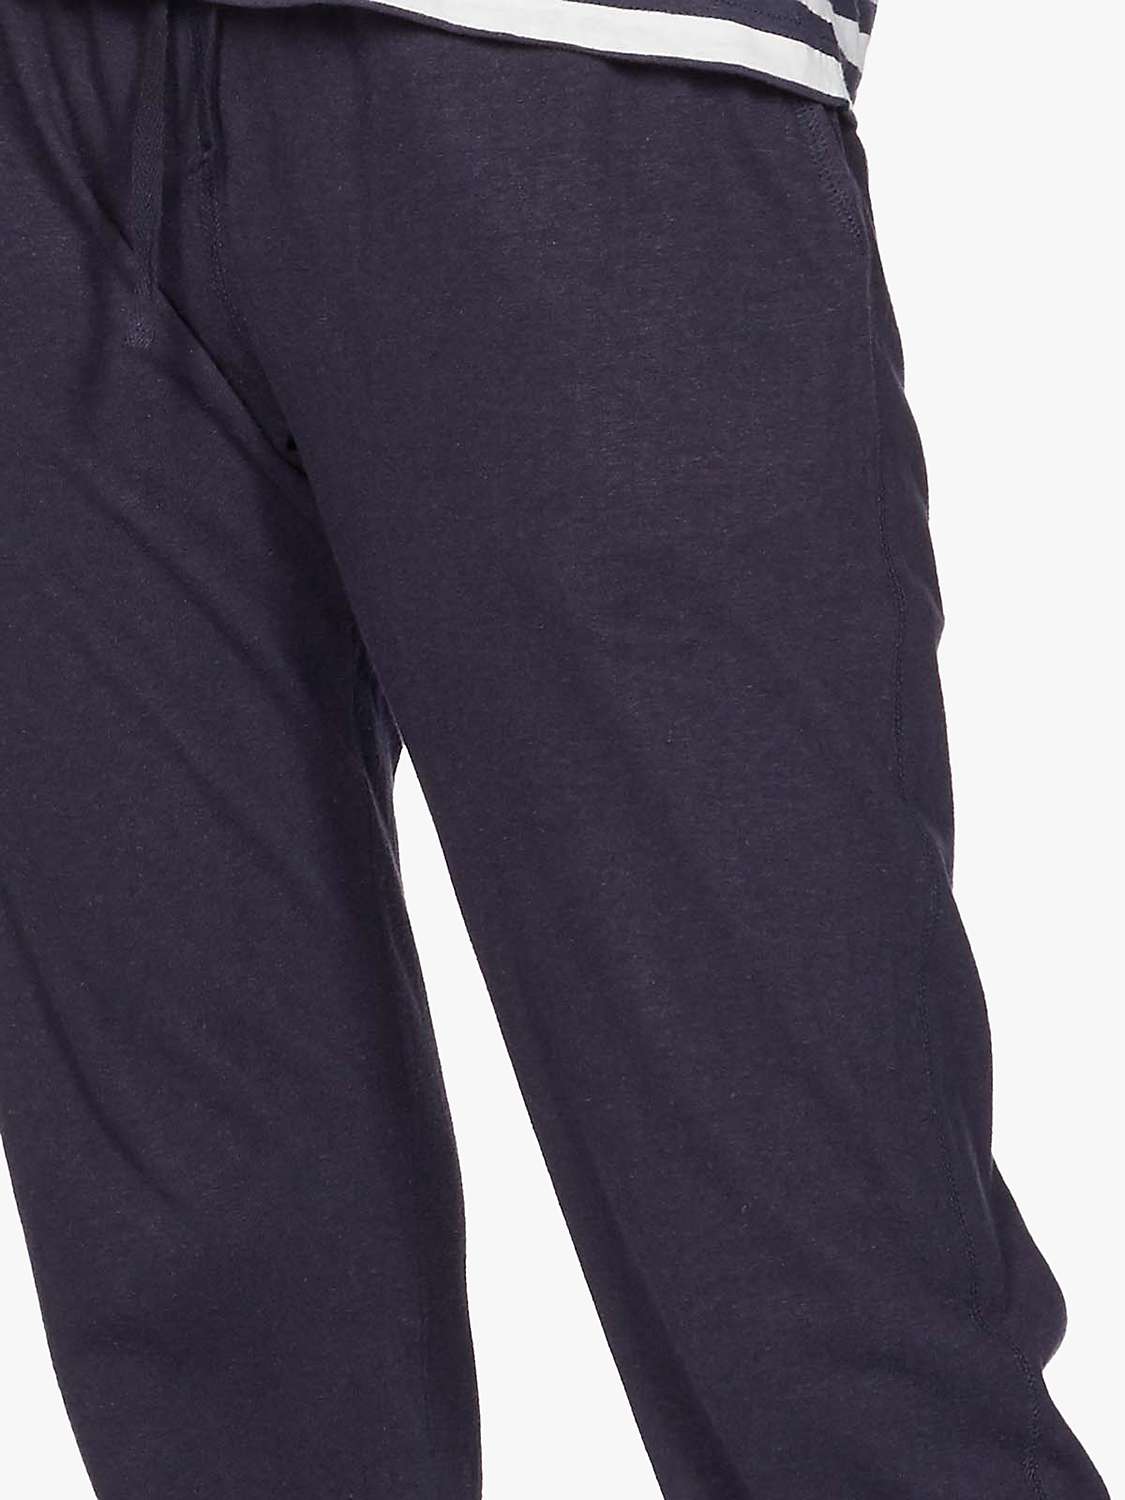 Buy Thought Cecilia Tie Waist Joggers, Navy Online at johnlewis.com